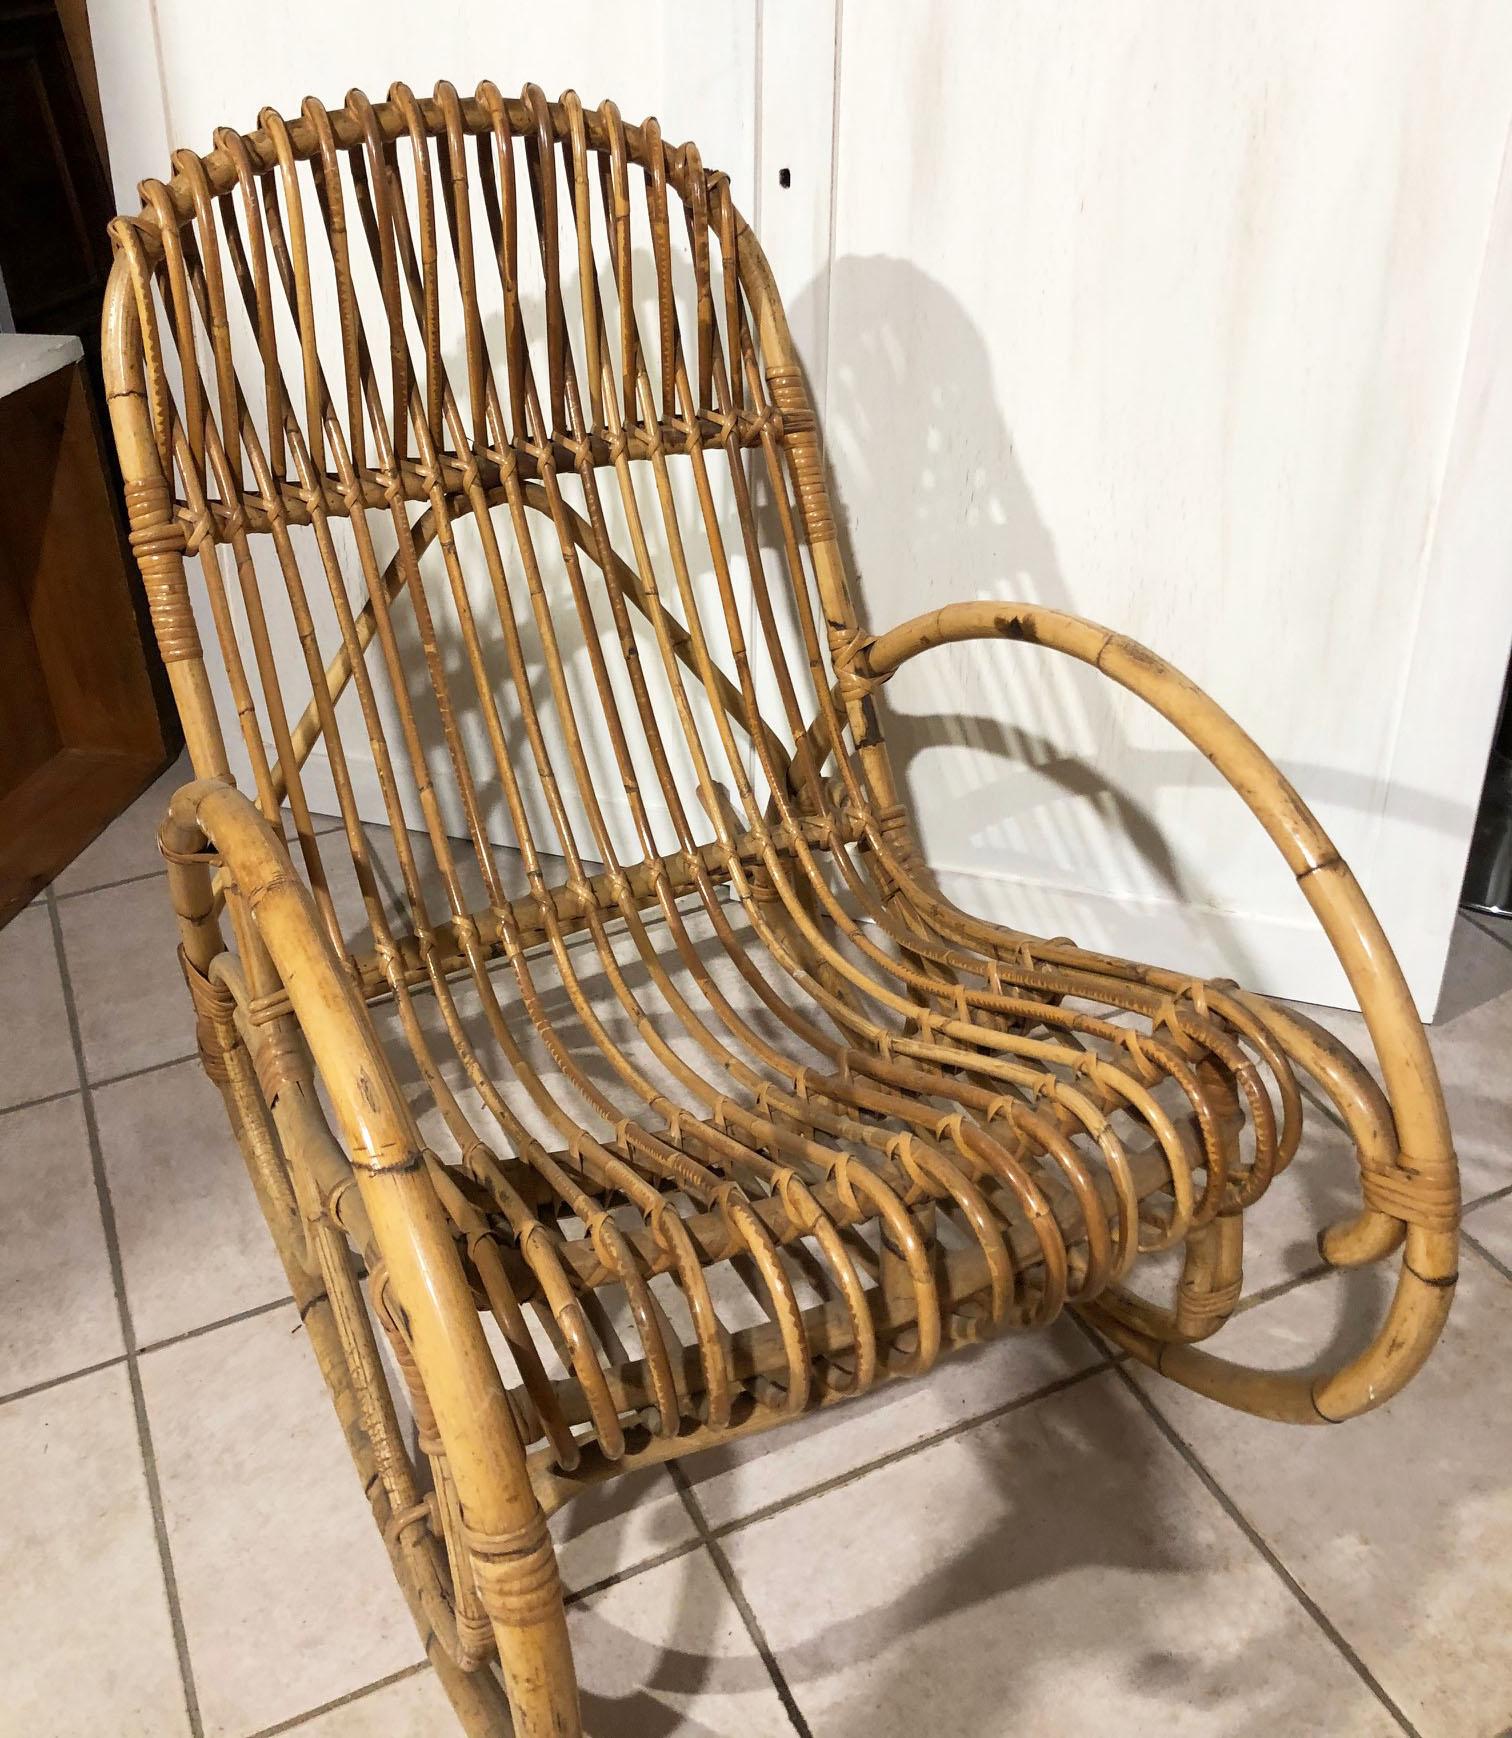 Rocking chair in bamboo, original from 1970s.
Great design.